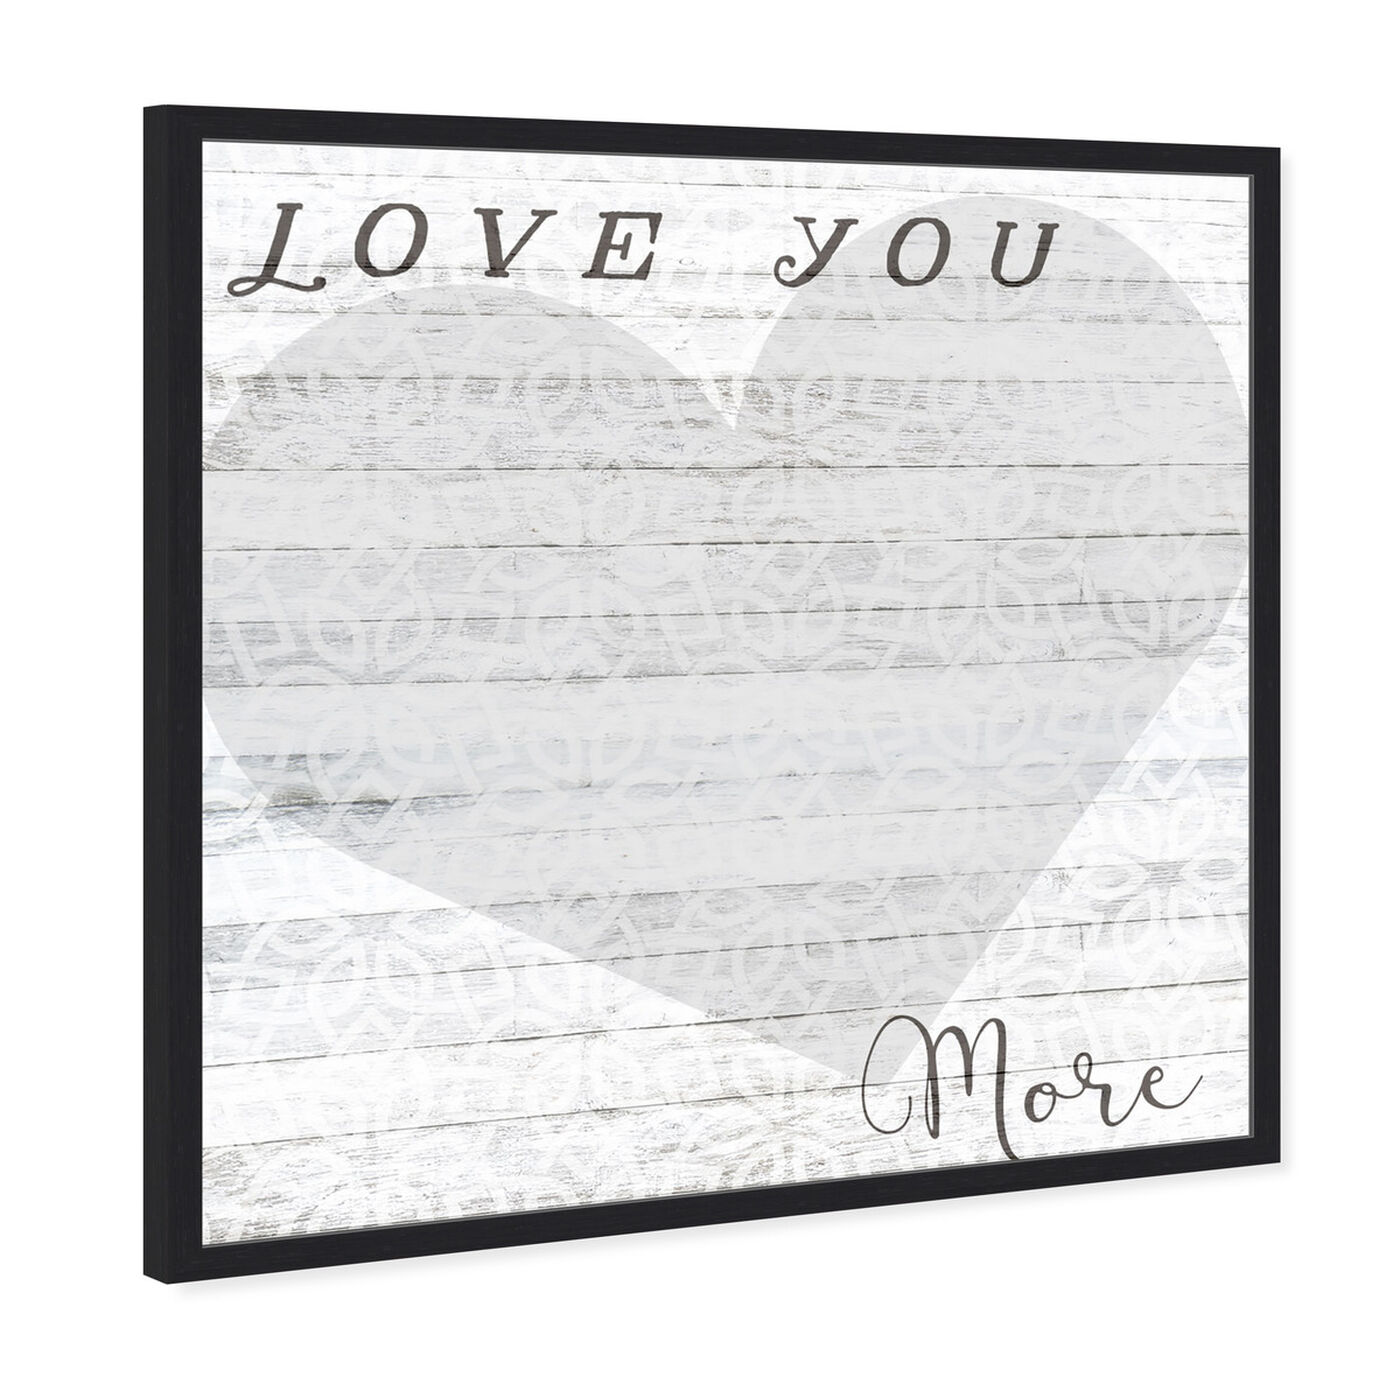 Angled view of Love You More Whiteboard featuring typography and quotes and love quotes and sayings art.